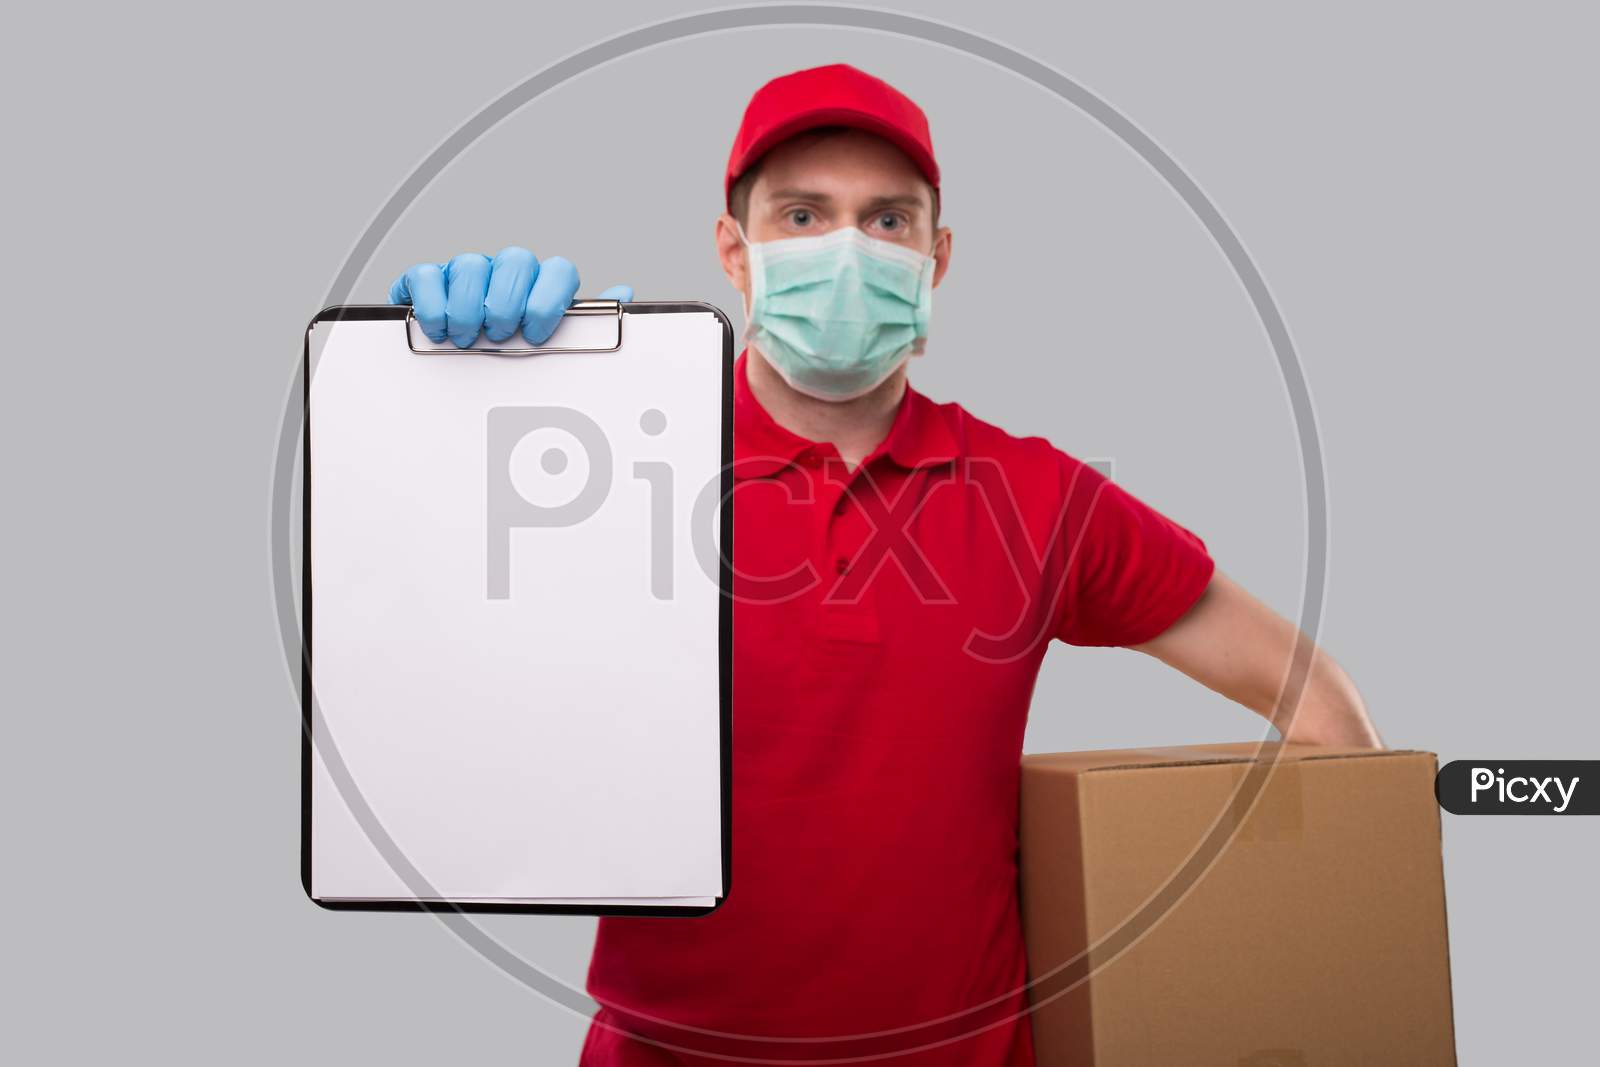 Delivery Man Wearing Medical Mask And Gloves Holding Clipboard And Box In Hands. Blank Clipboard In Hands